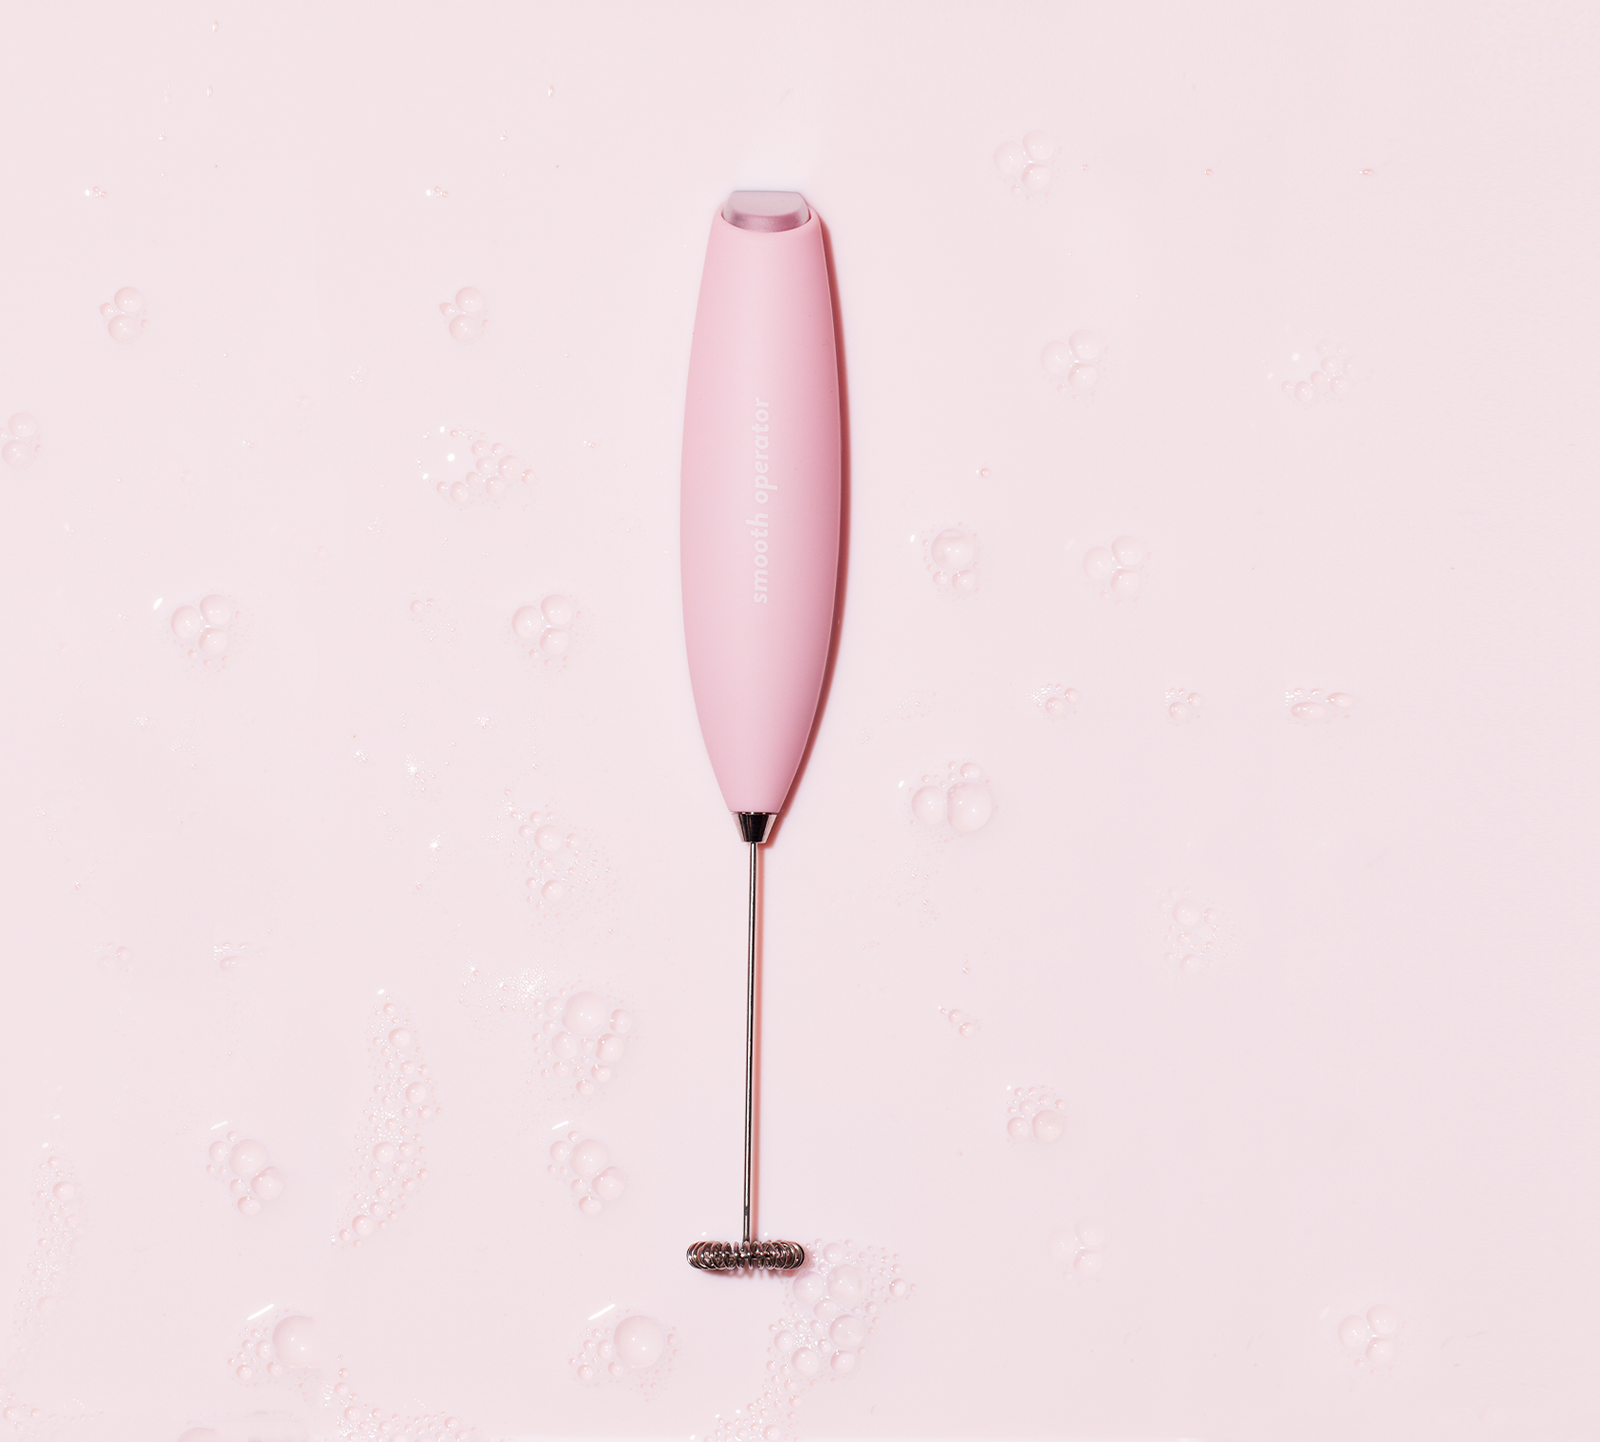 Smooth Operator Pink Handheld Electric Whisk, Milk Frother, Foam Maker for  Protein, Coffee & More - Stainless Steel Stand Included